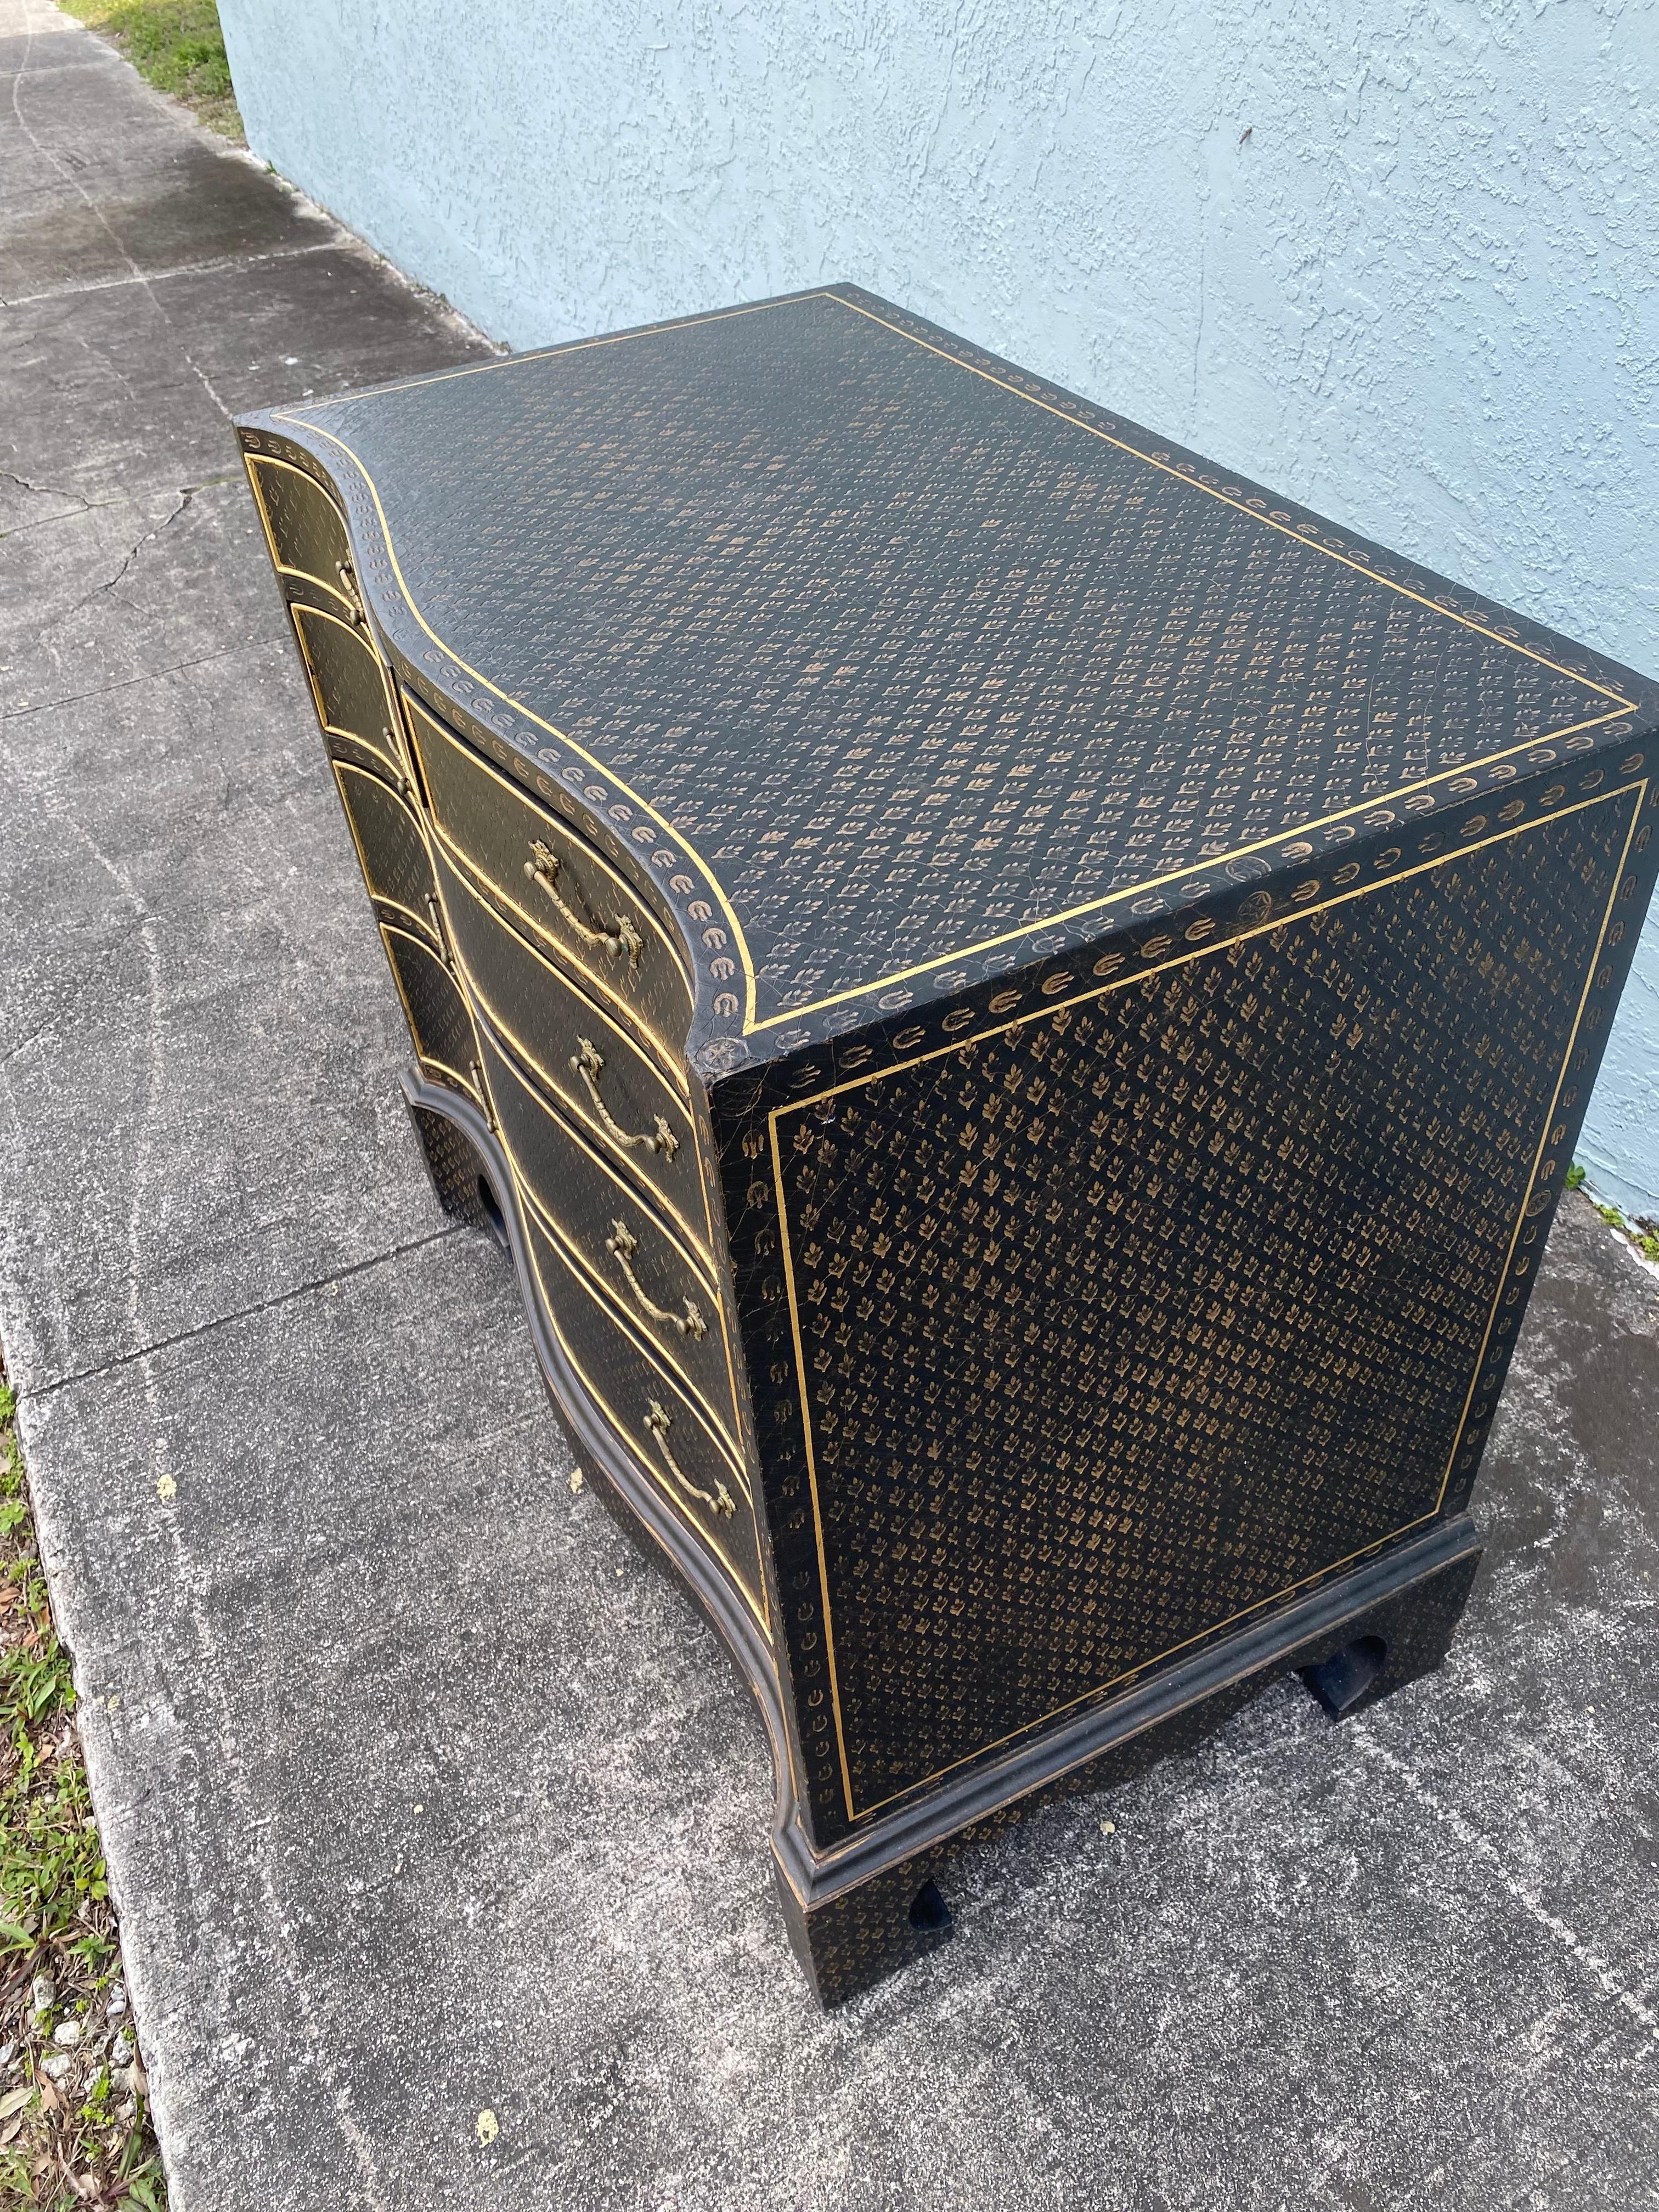 Serpentine Ebonized  Bronze Paint Imprinted Leather Wrapped Commode Dresser  In Good Condition For Sale In Fort Lauderdale, FL